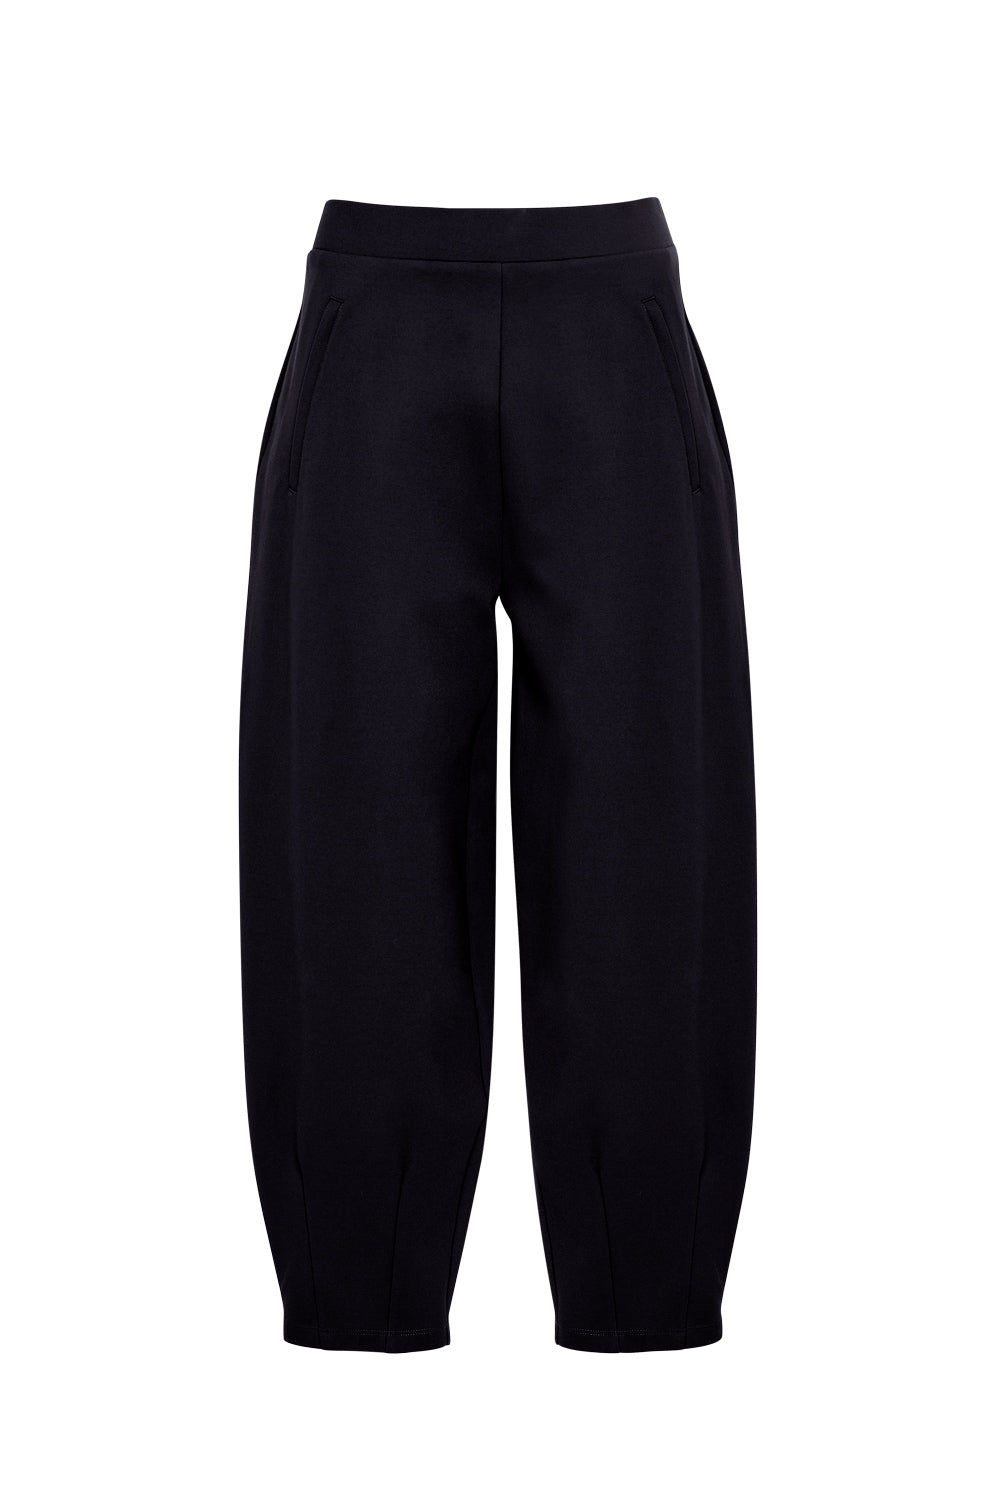 MADLY SWEETLY ON PONTE TULIP PANT - BLACK - THE VOGUE STORE